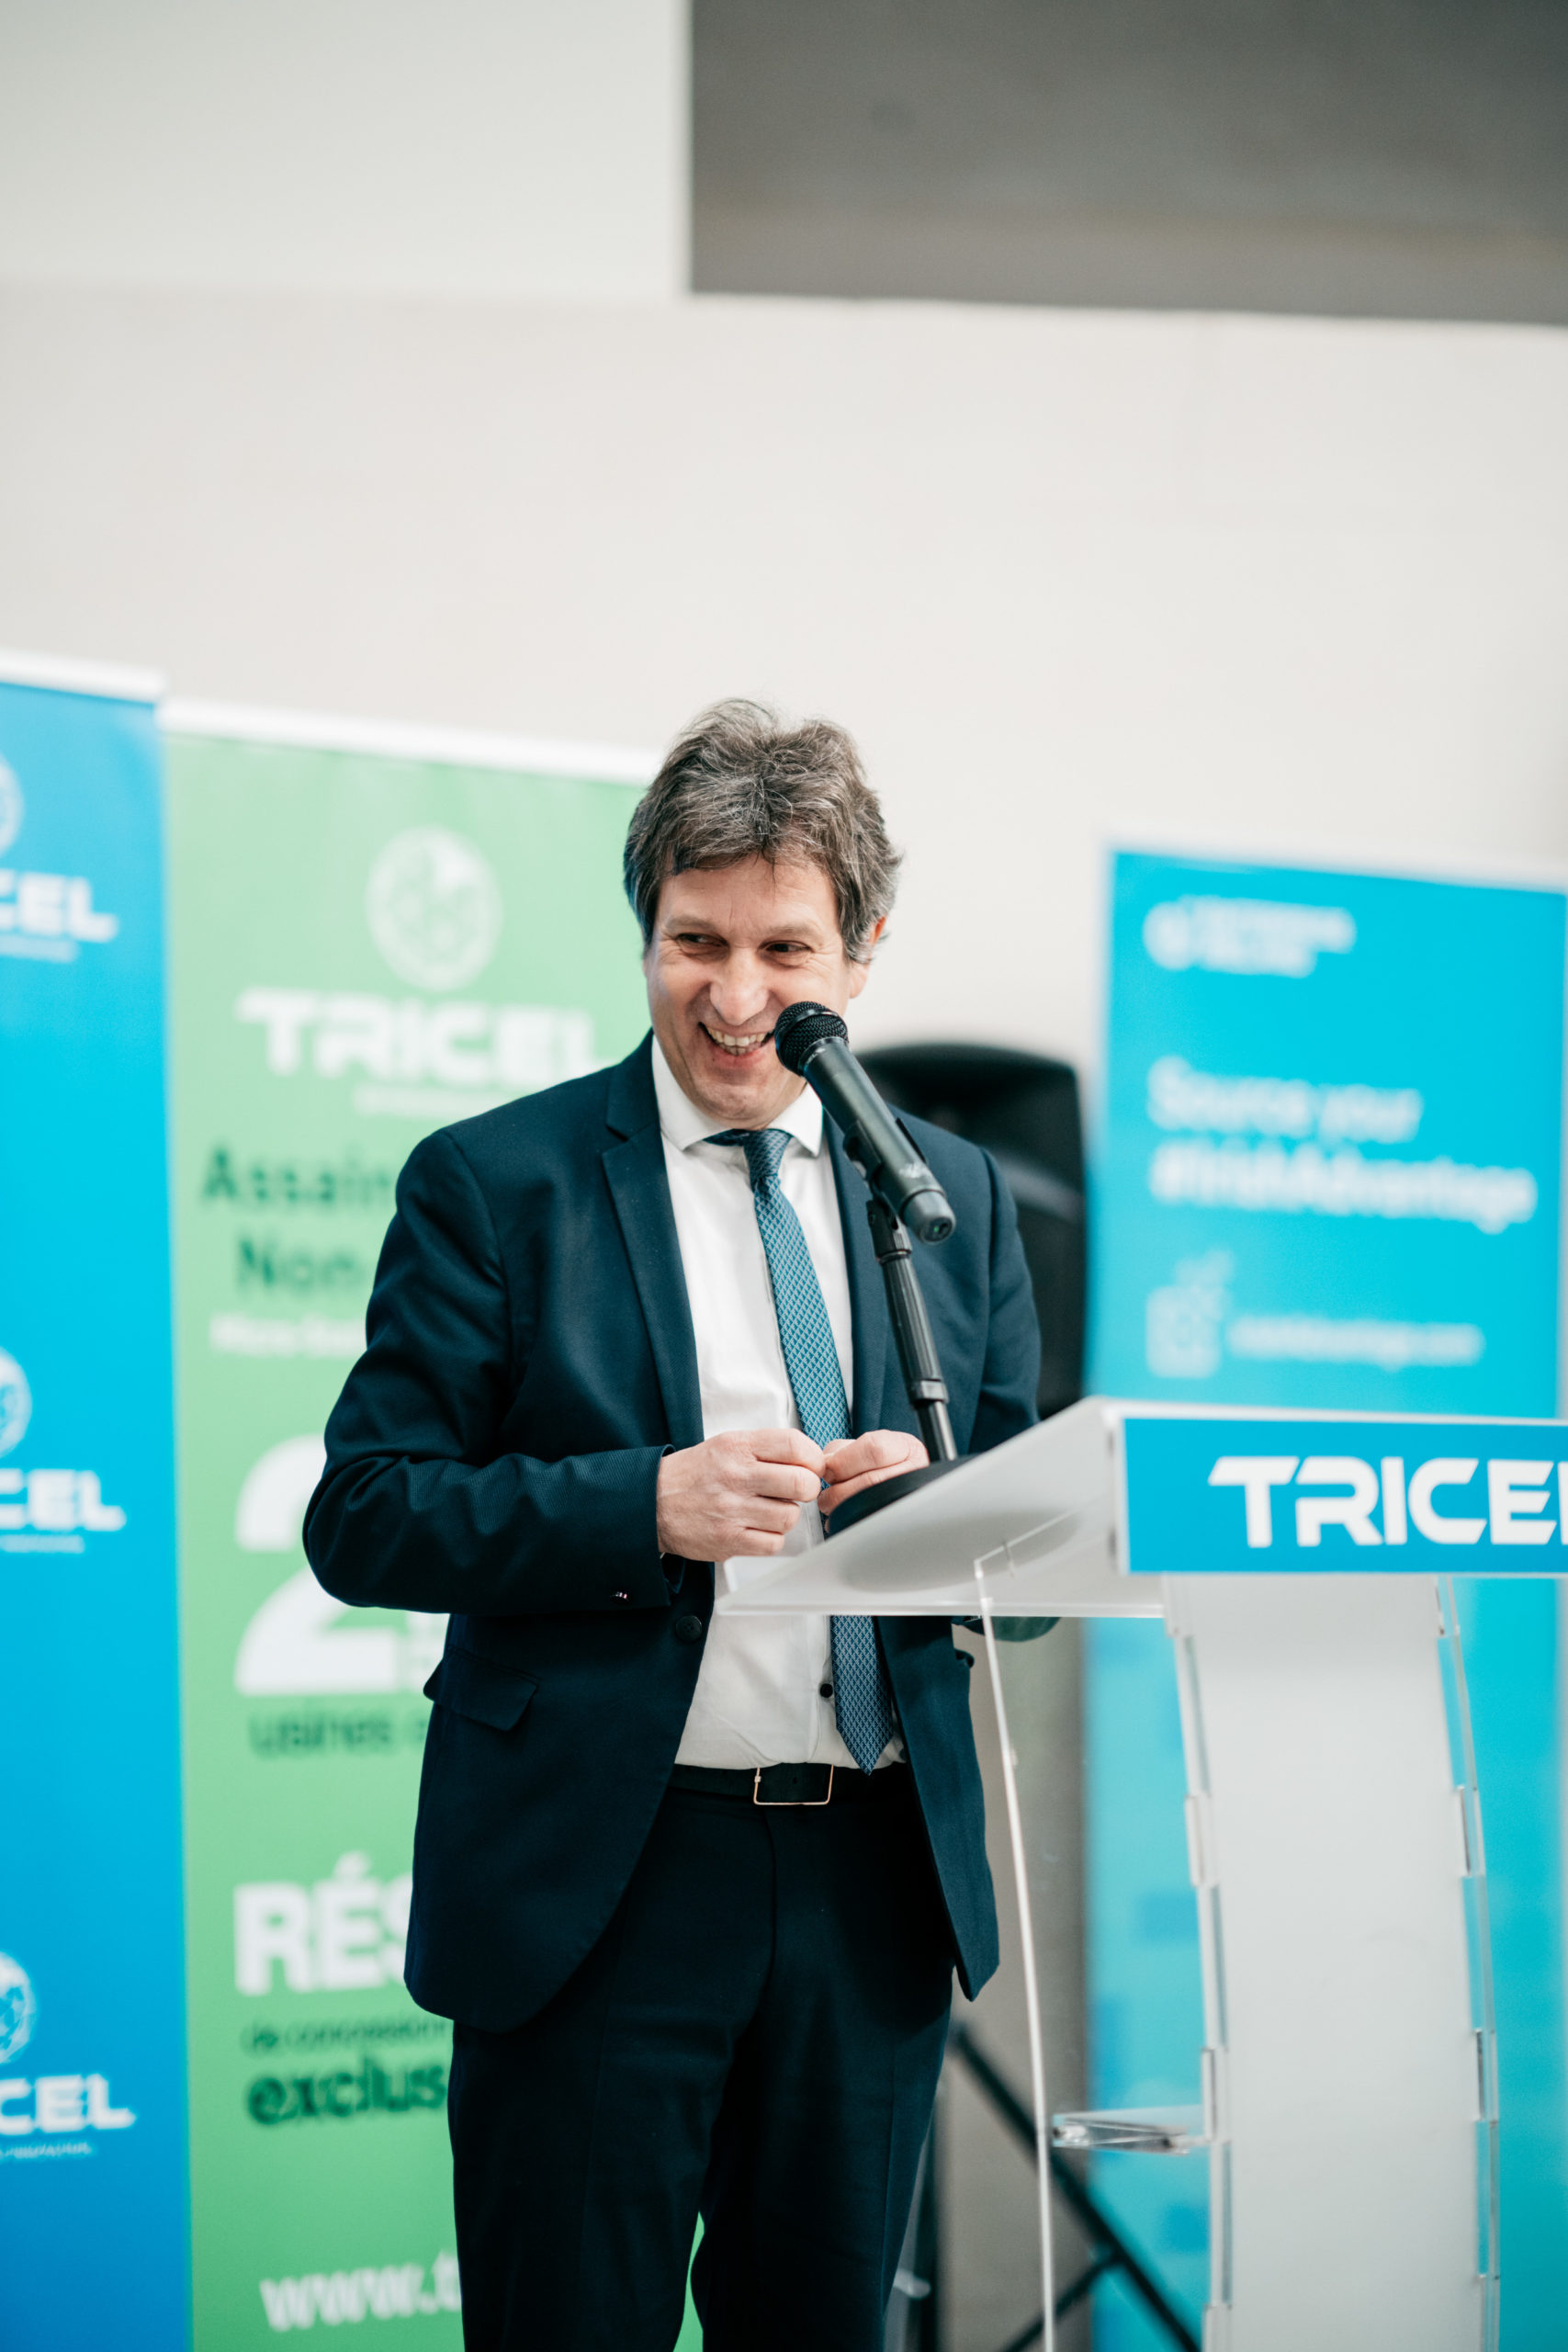 ricel’s continued successful expansion in France